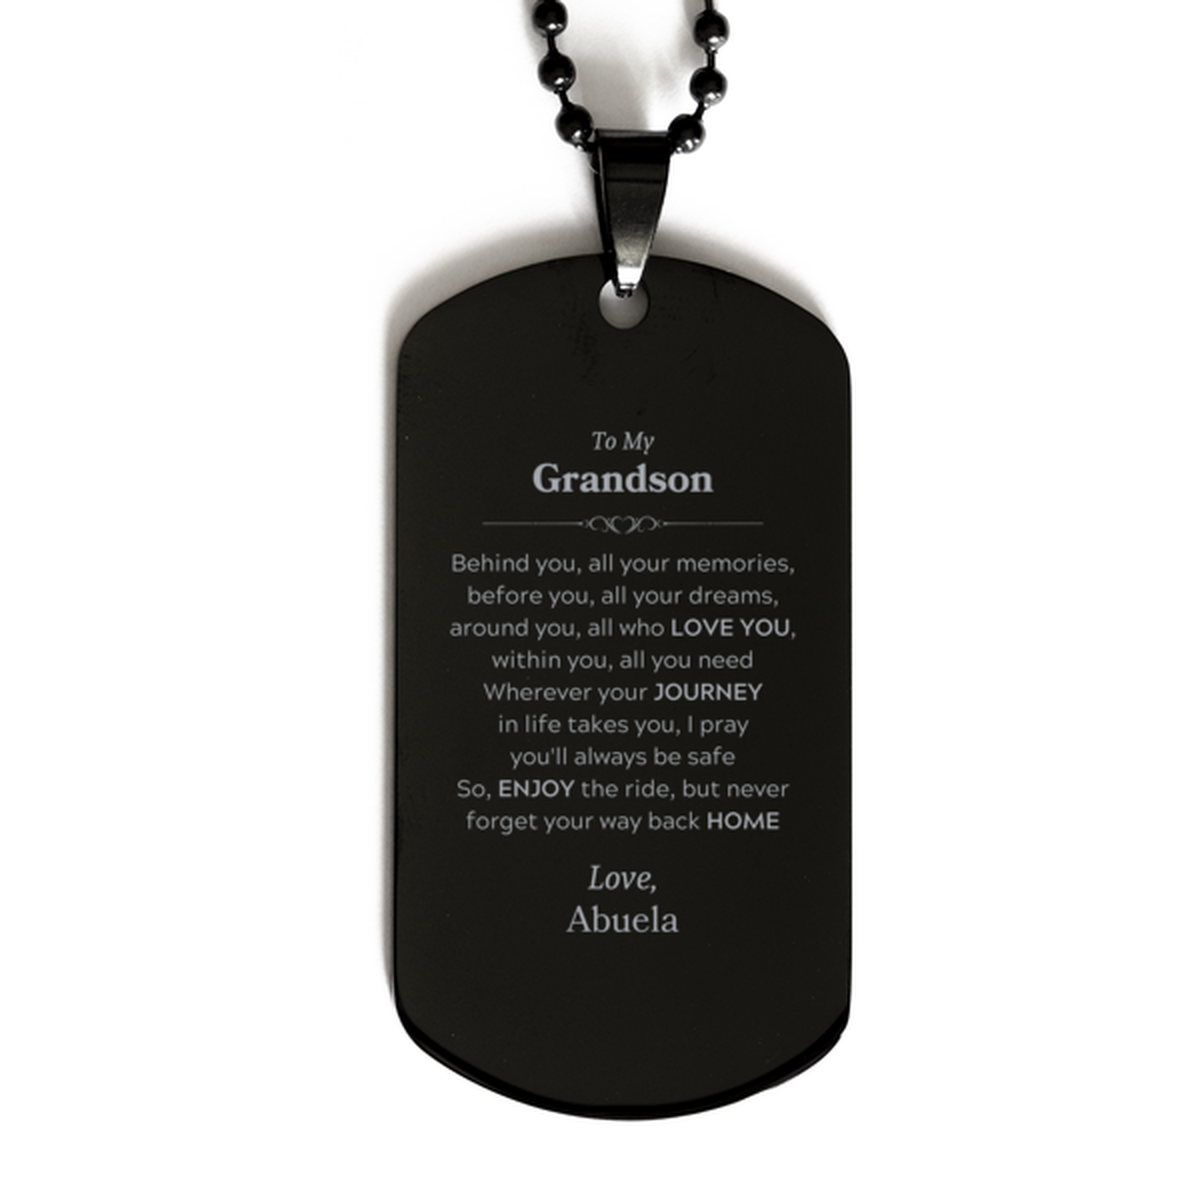 To My Grandson Graduation Gifts from Abuela, Grandson Black Dog Tag Christmas Birthday Gifts for Grandson Behind you, all your memories, before you, all your dreams. Love, Abuela